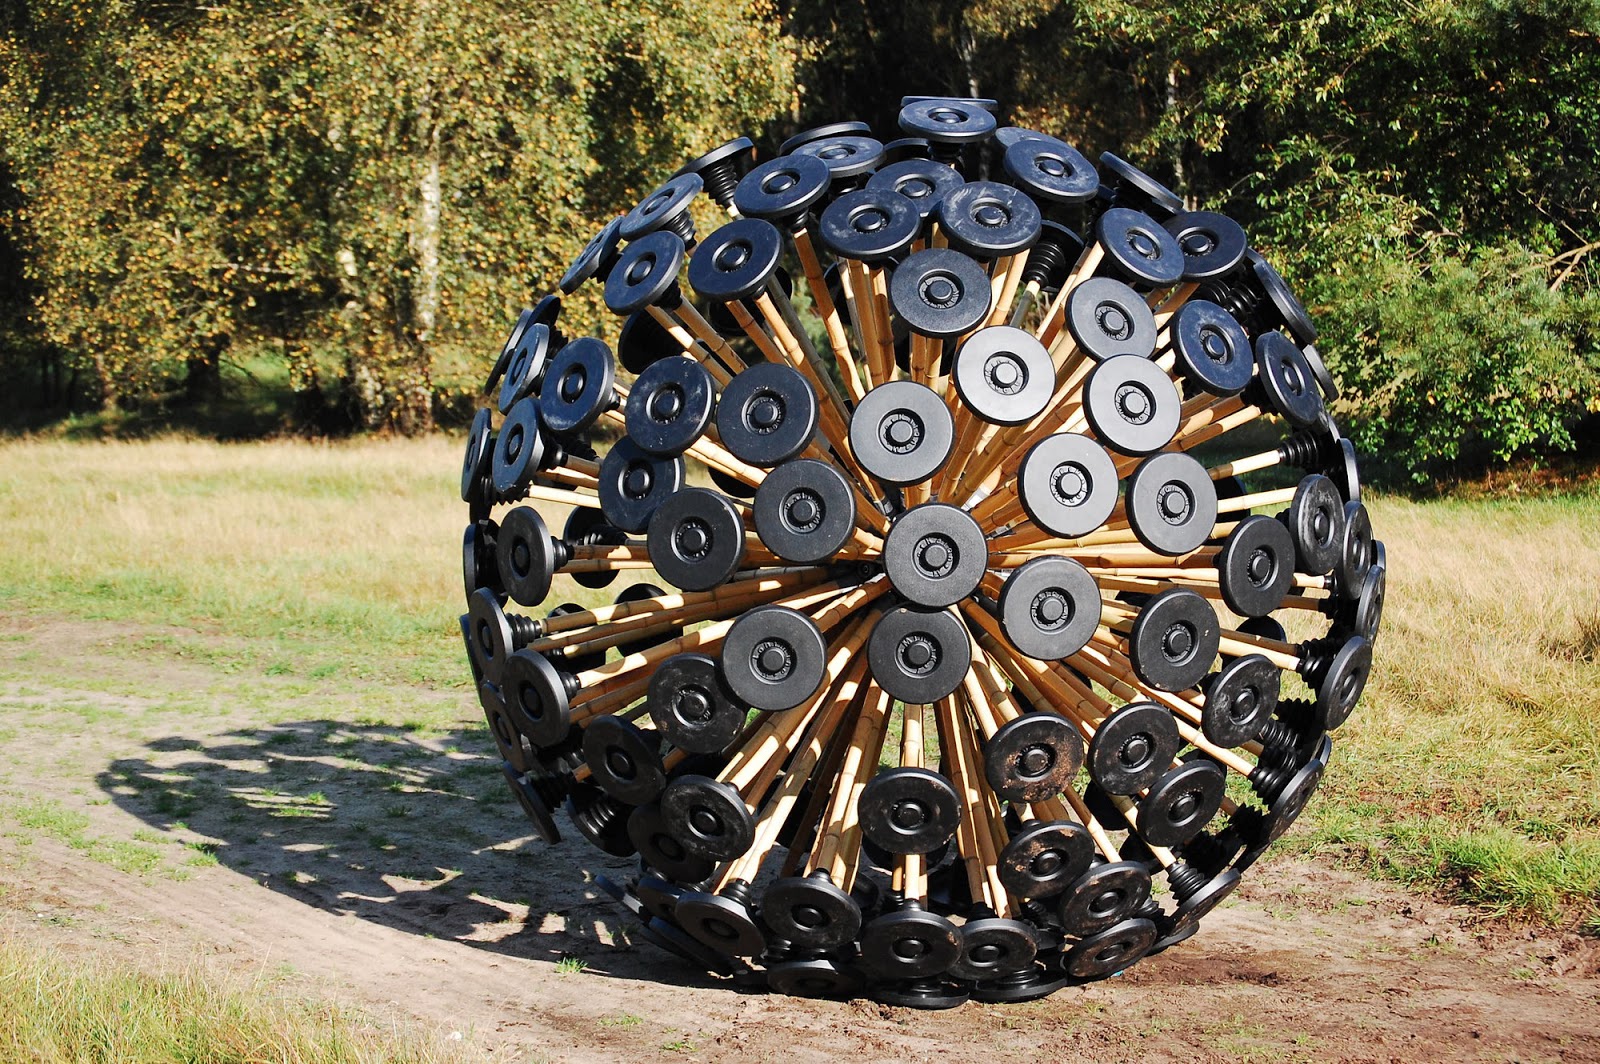 Wind driven sphere of bamboo and biodegradable plastic designed to clear land mines.